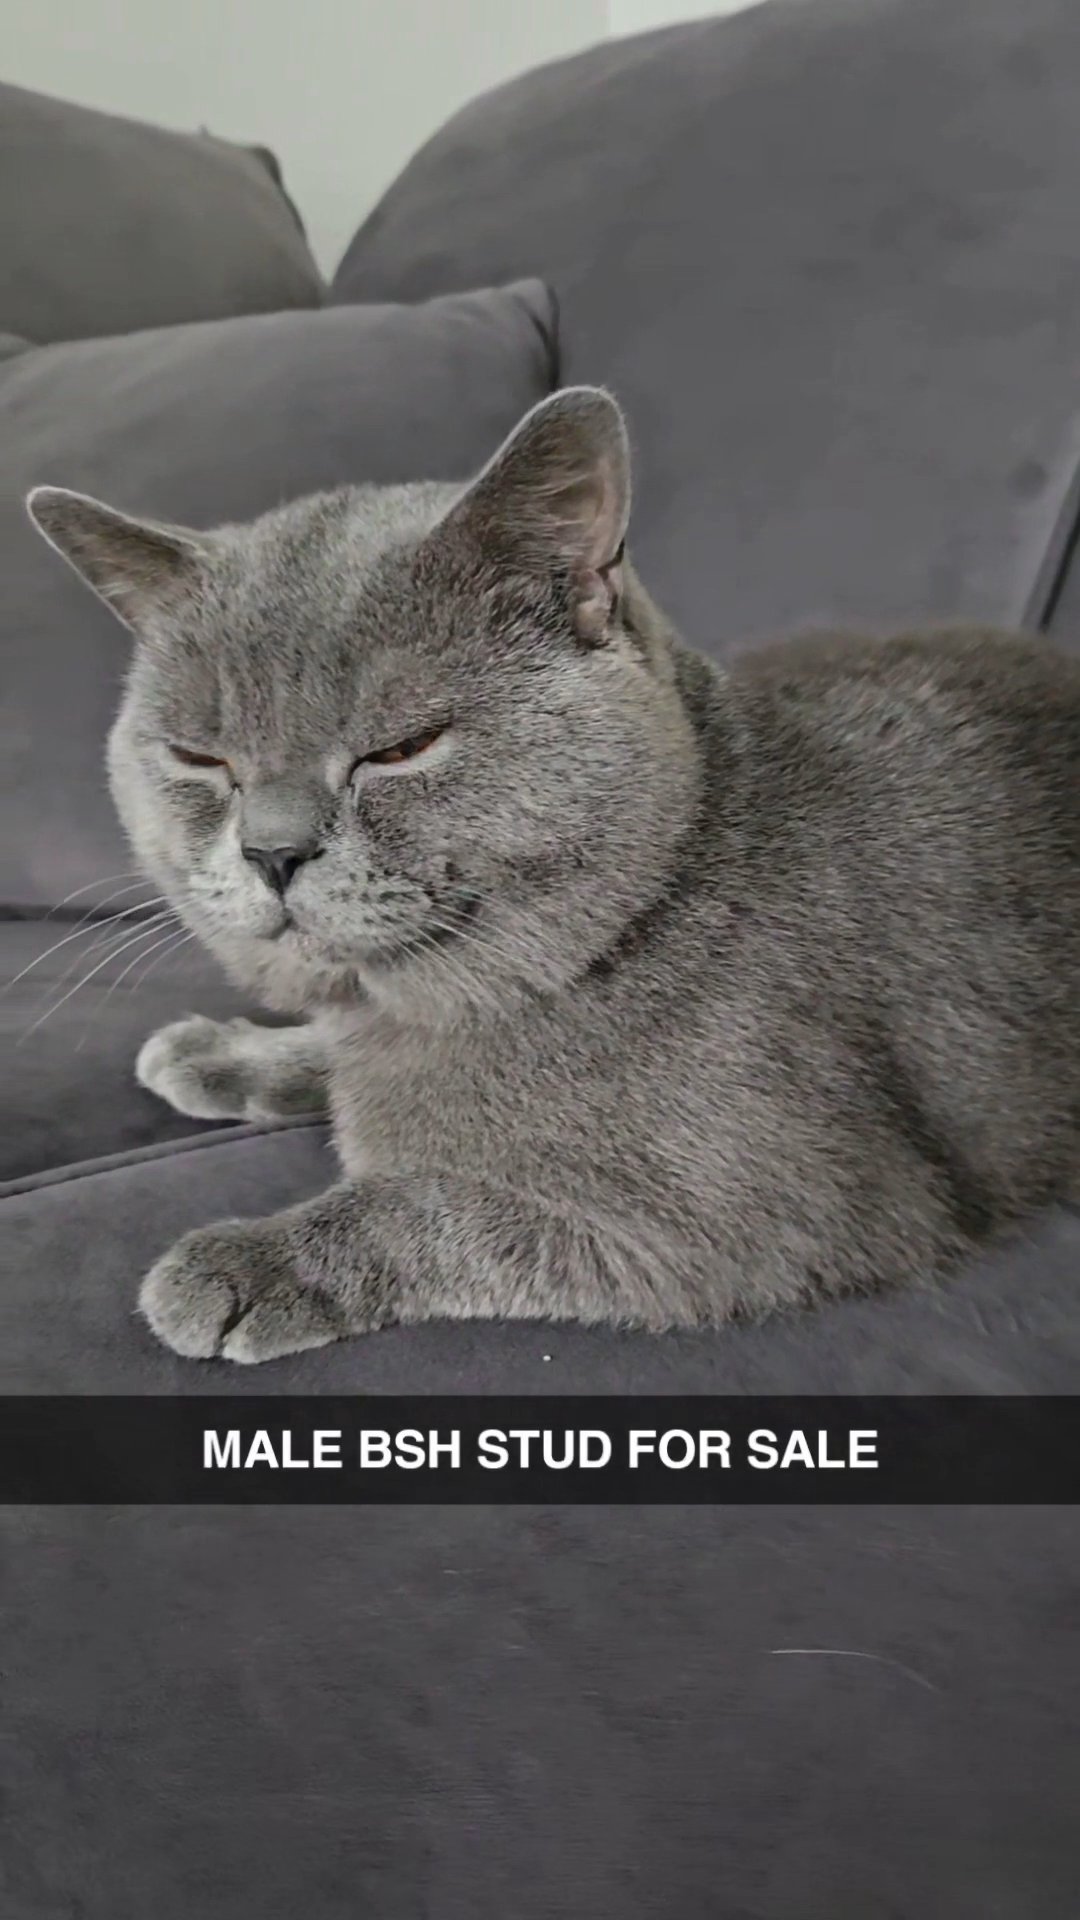 MALE BSH CAT FOR SALE in Manchester